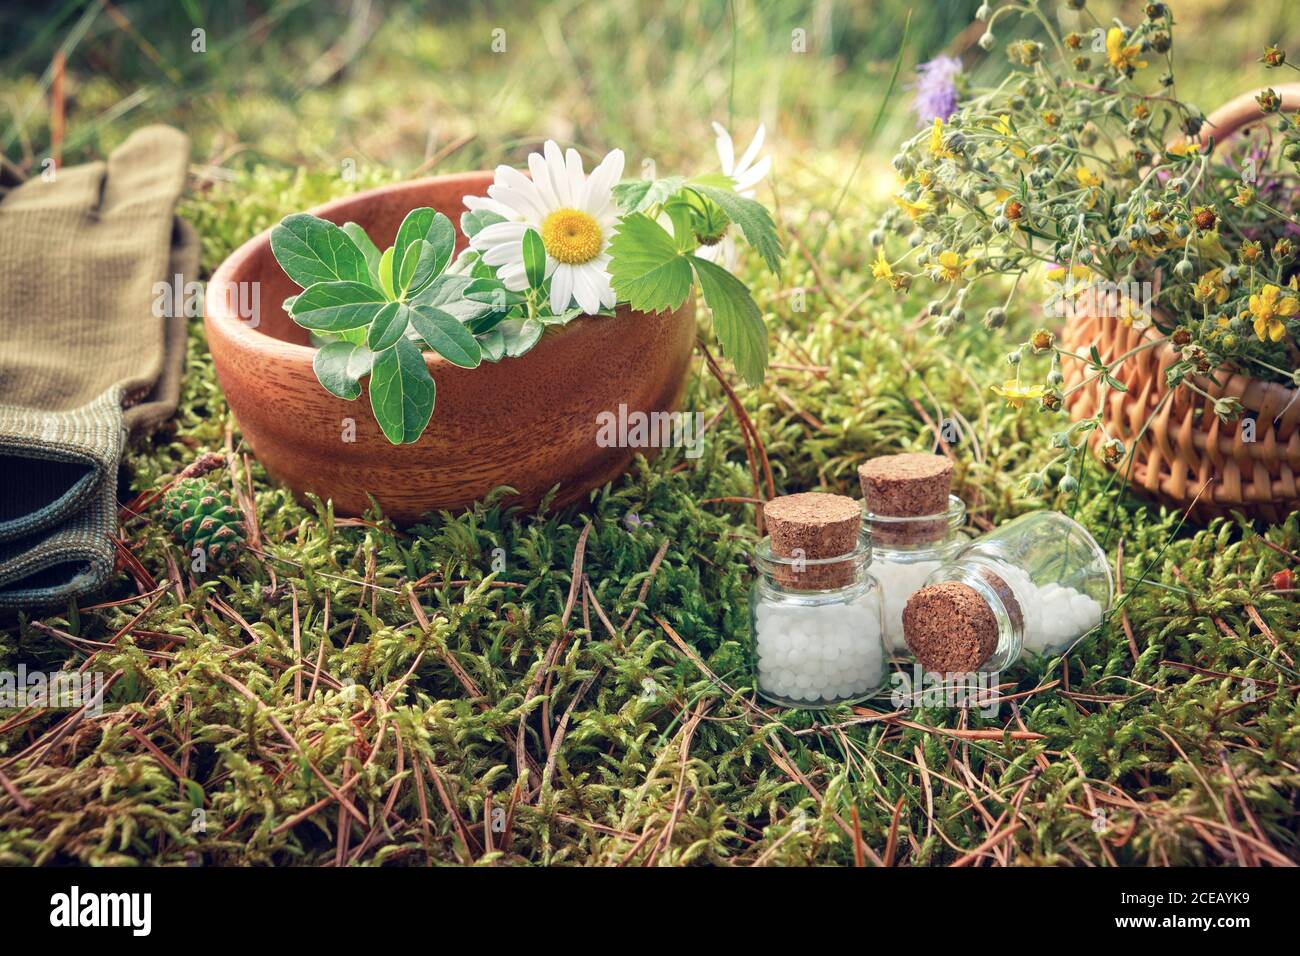 Three bottle of homeopathic globules, wooden bowl and basket of medicinal herbs, gloves on a moss in forest outdoors. Stock Photo